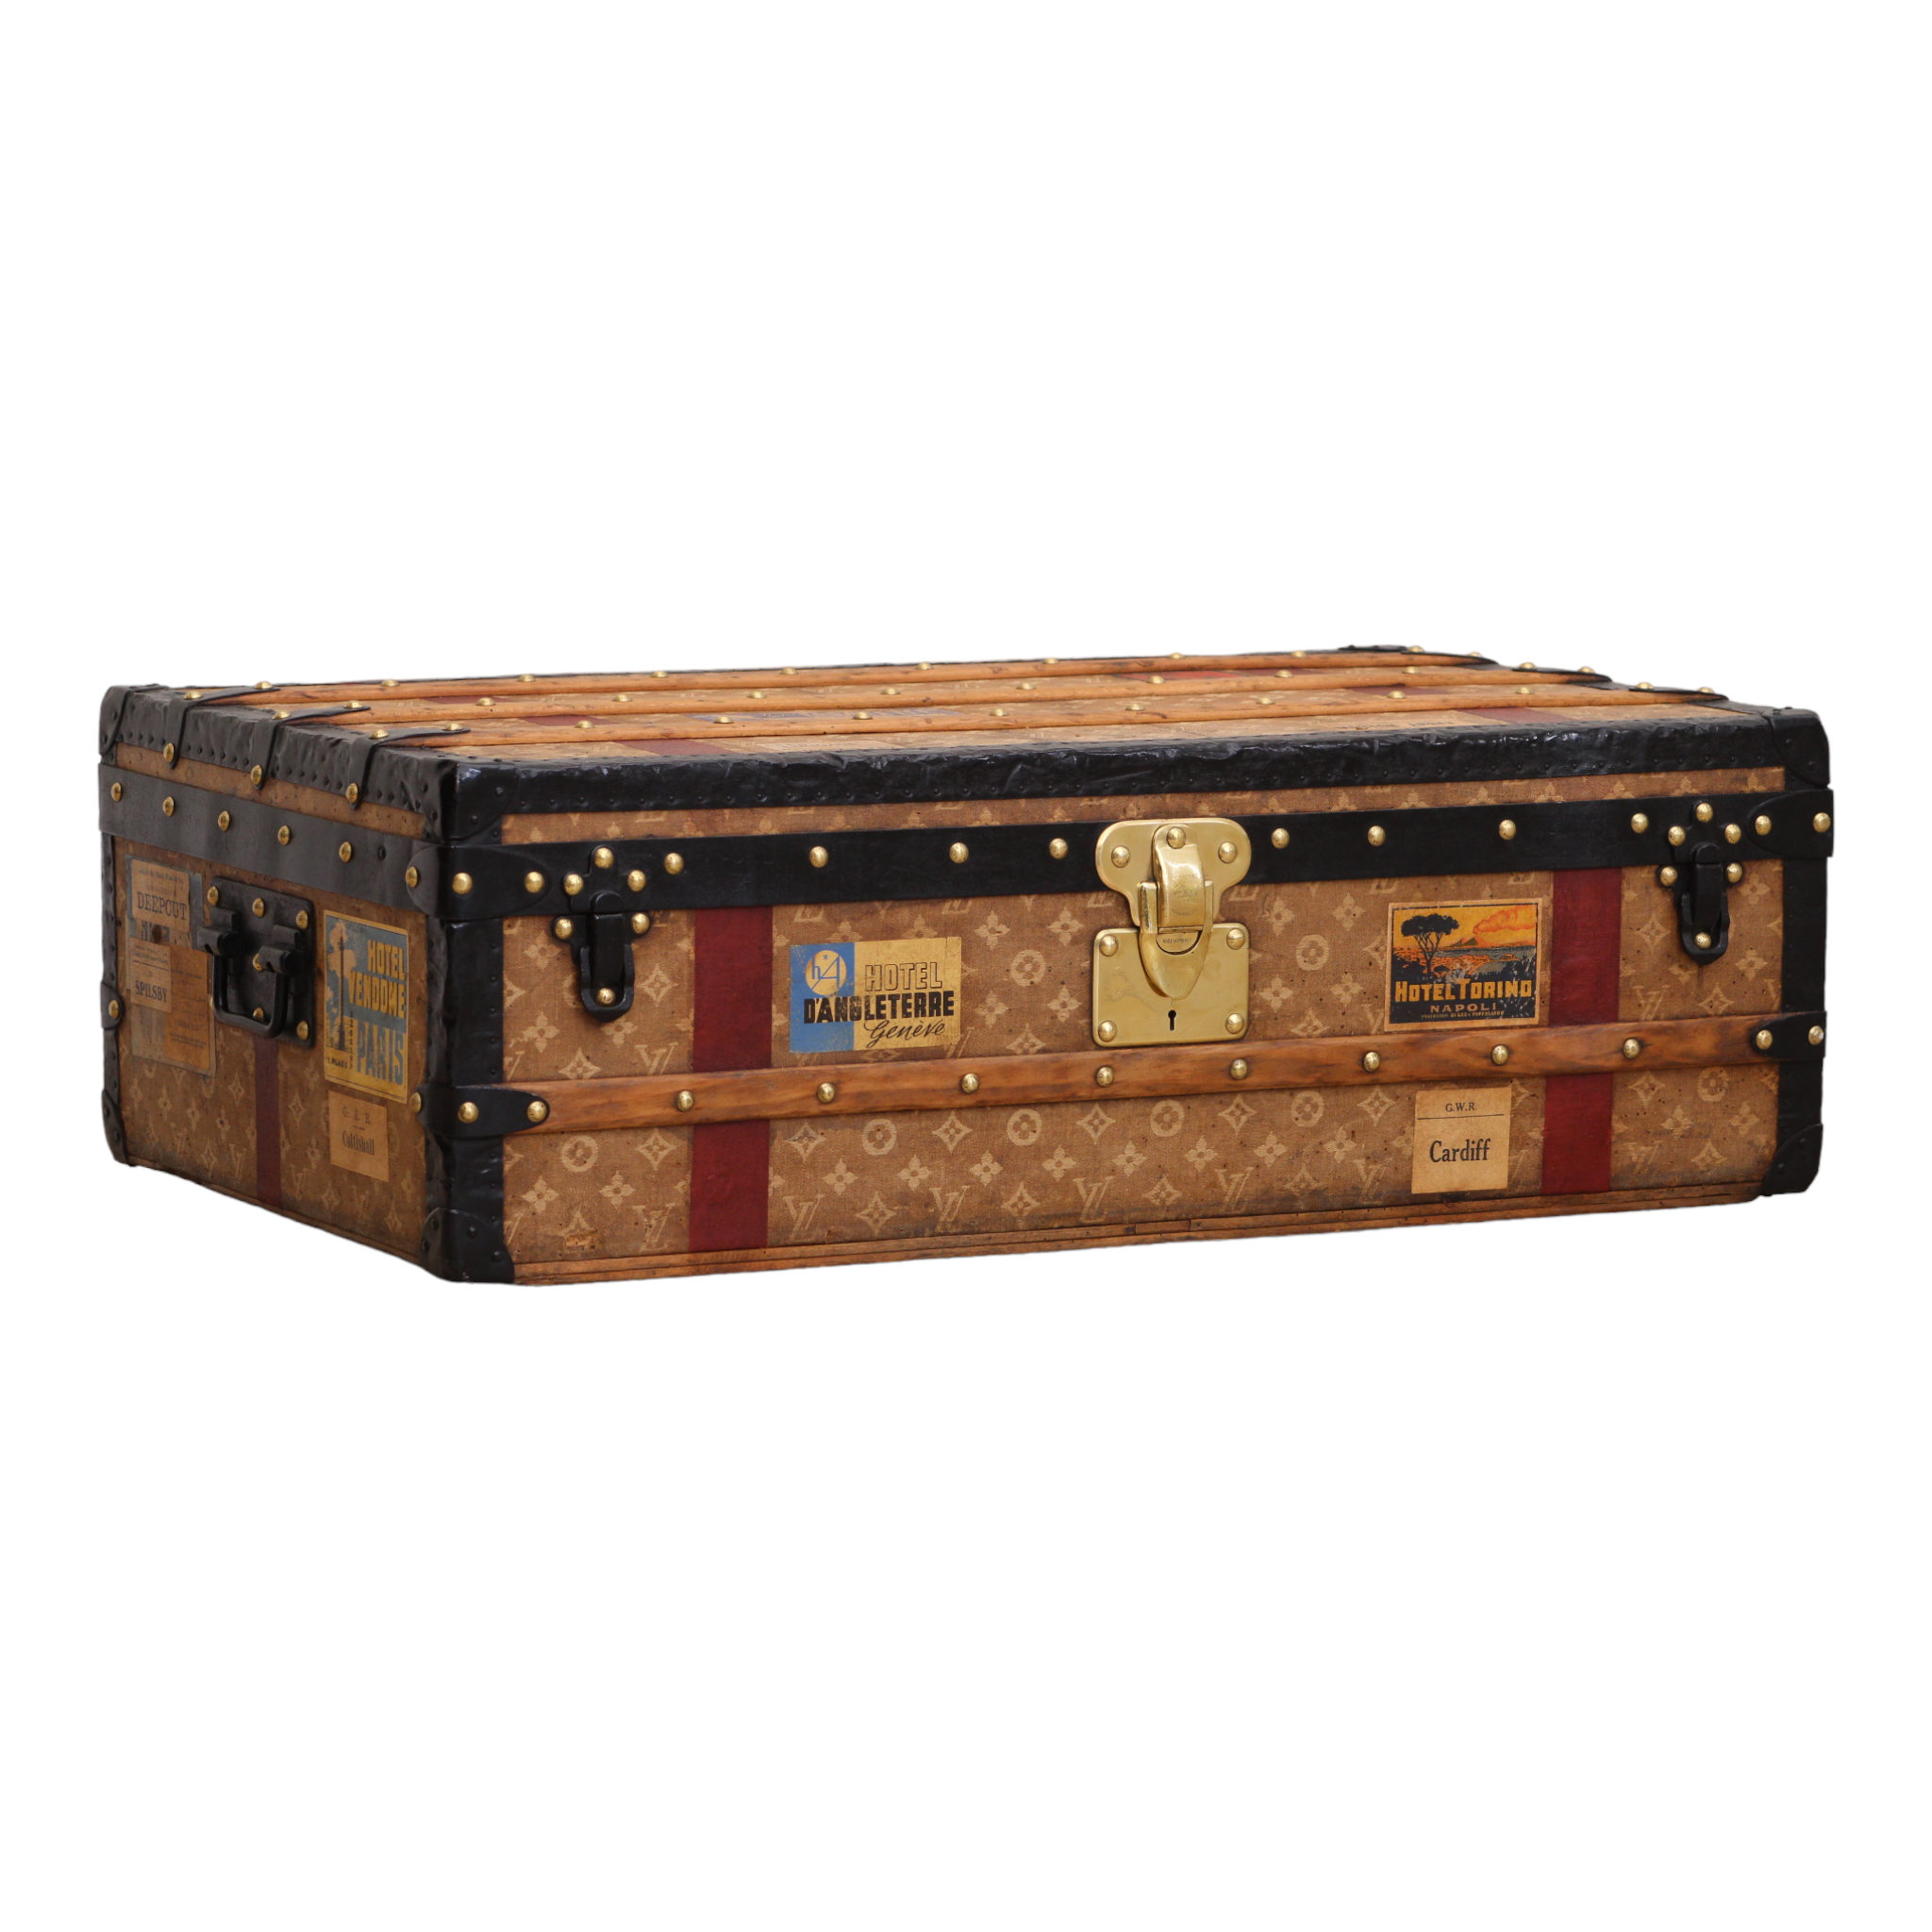 A Short History of Louis Vuitton Travel Trunks